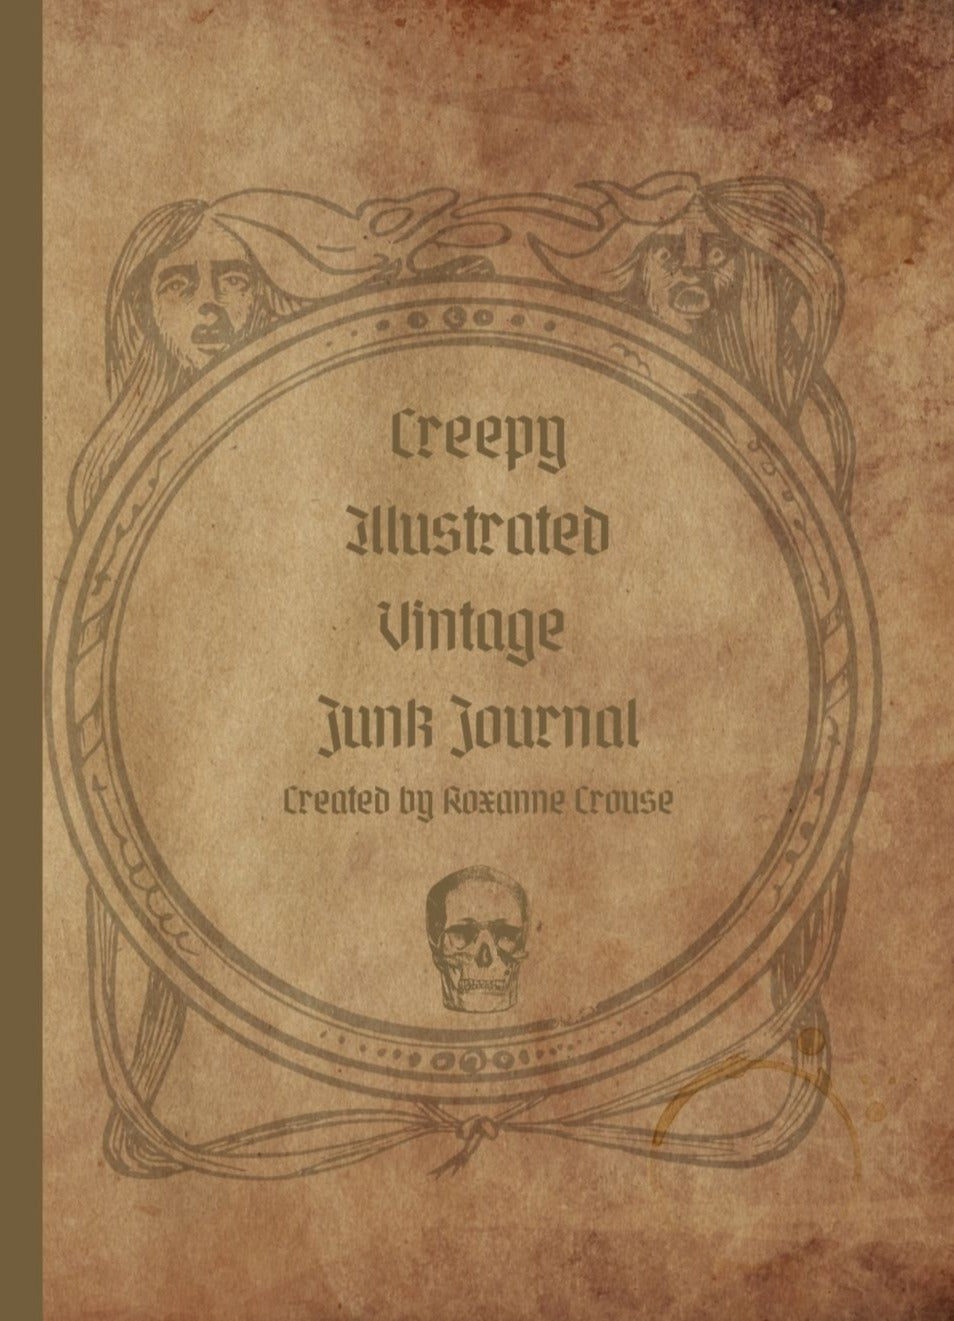 Creepy Illustrated Vintage Junk Journal: Strangely Decorated Notebook For Writing, Journaling or Taking Notes